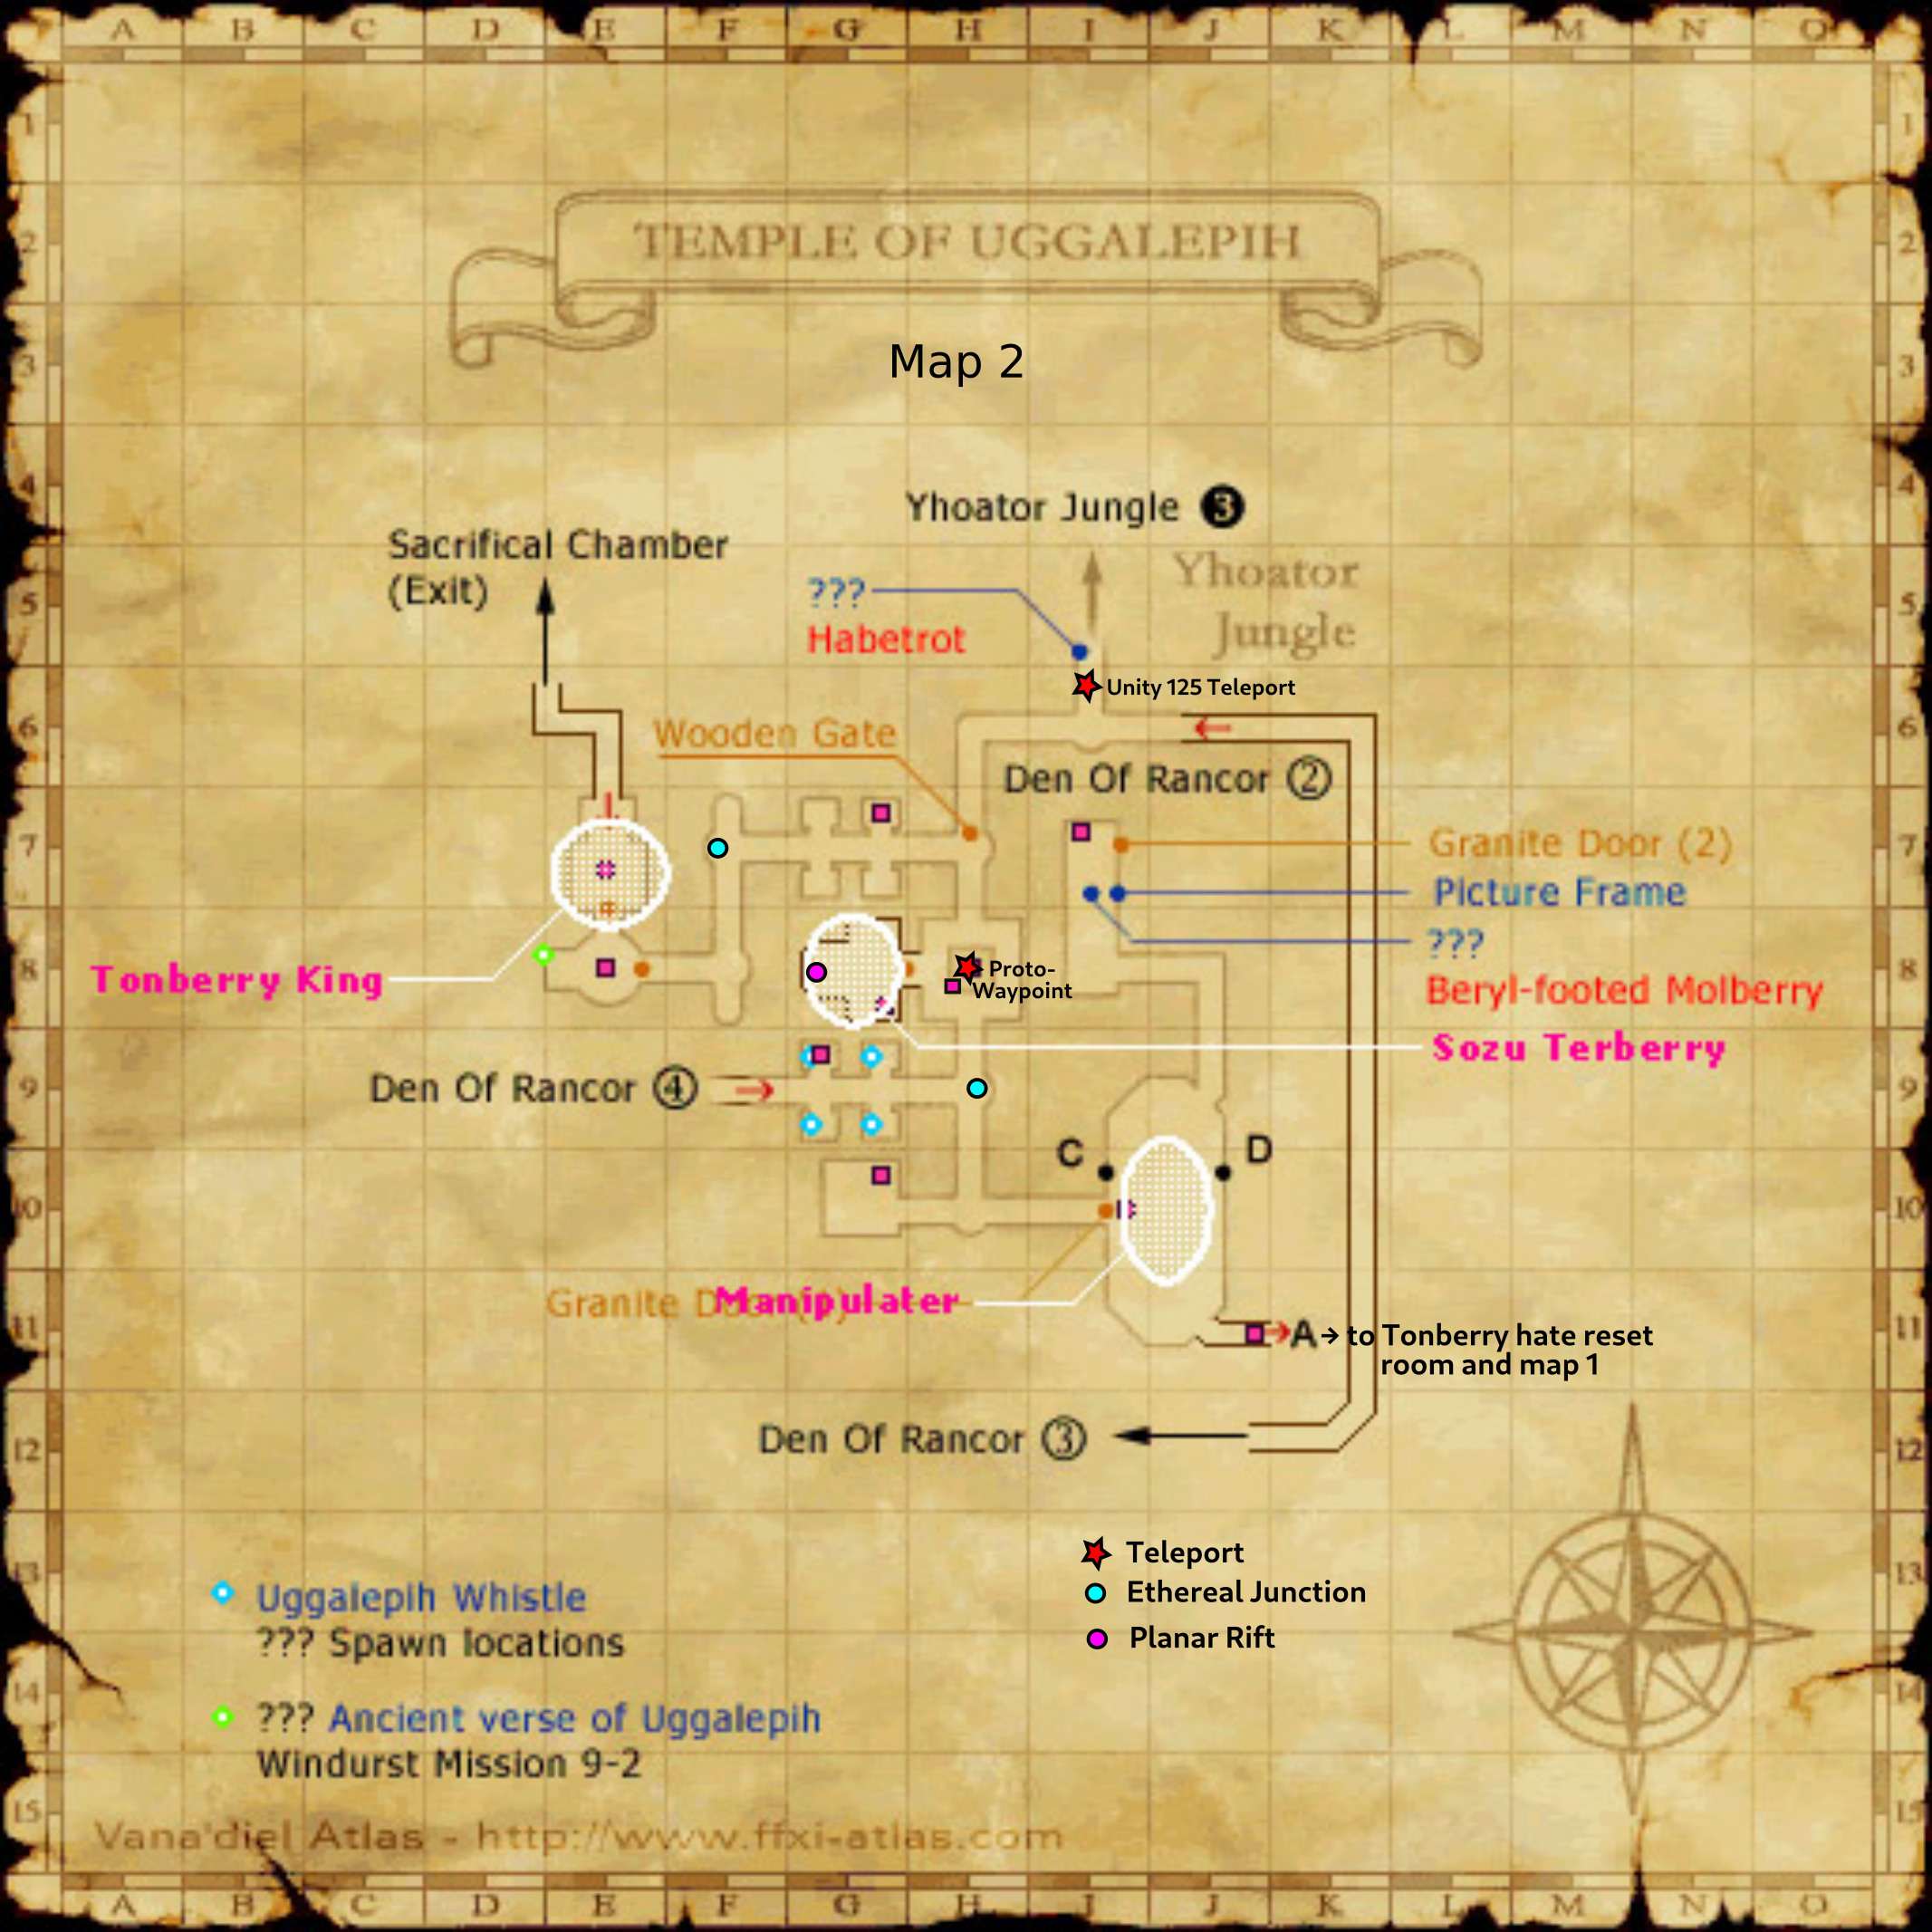 Temple of Uggalepih-map2-with-additional-markers.jpg